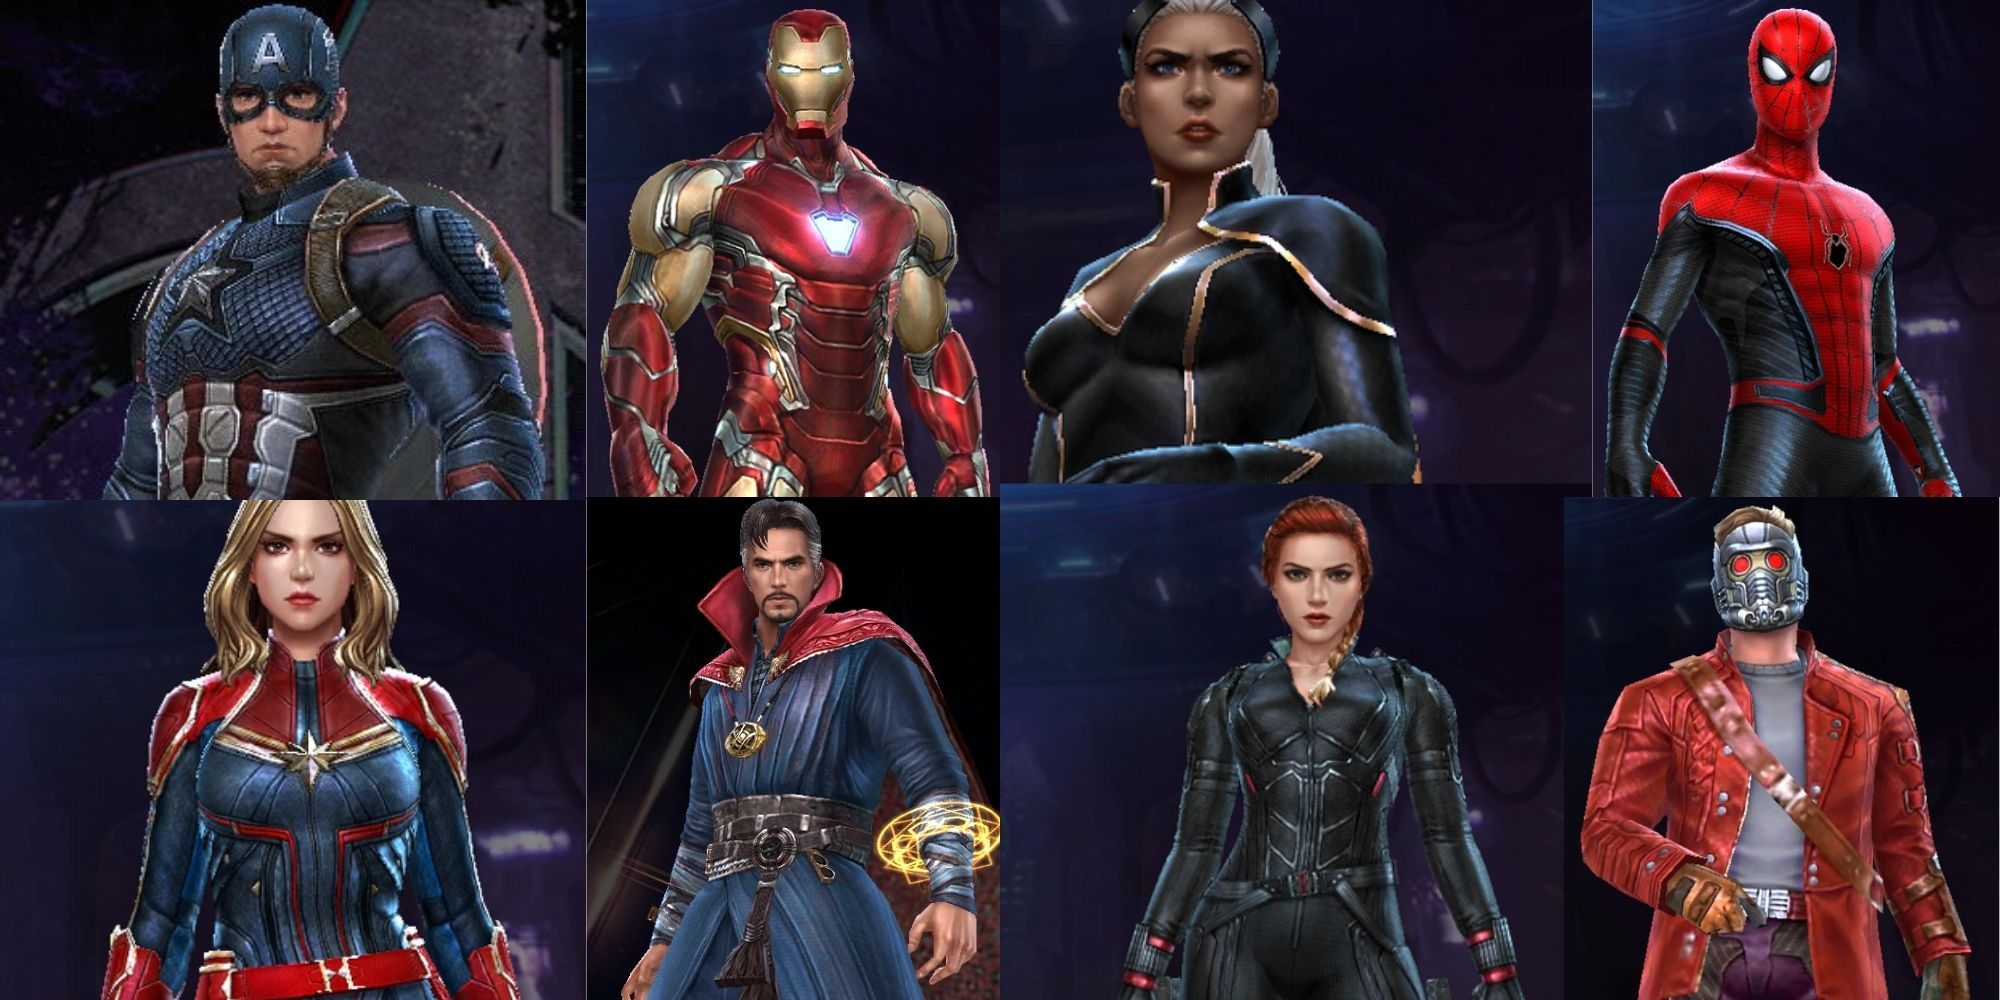 Split image of Captain America, Storm, Black Widow, Iron Man, Captain Marvel, Spider-Man, Doctor Strange, and Star-Lord's character models from Marvel Future Revolution. 